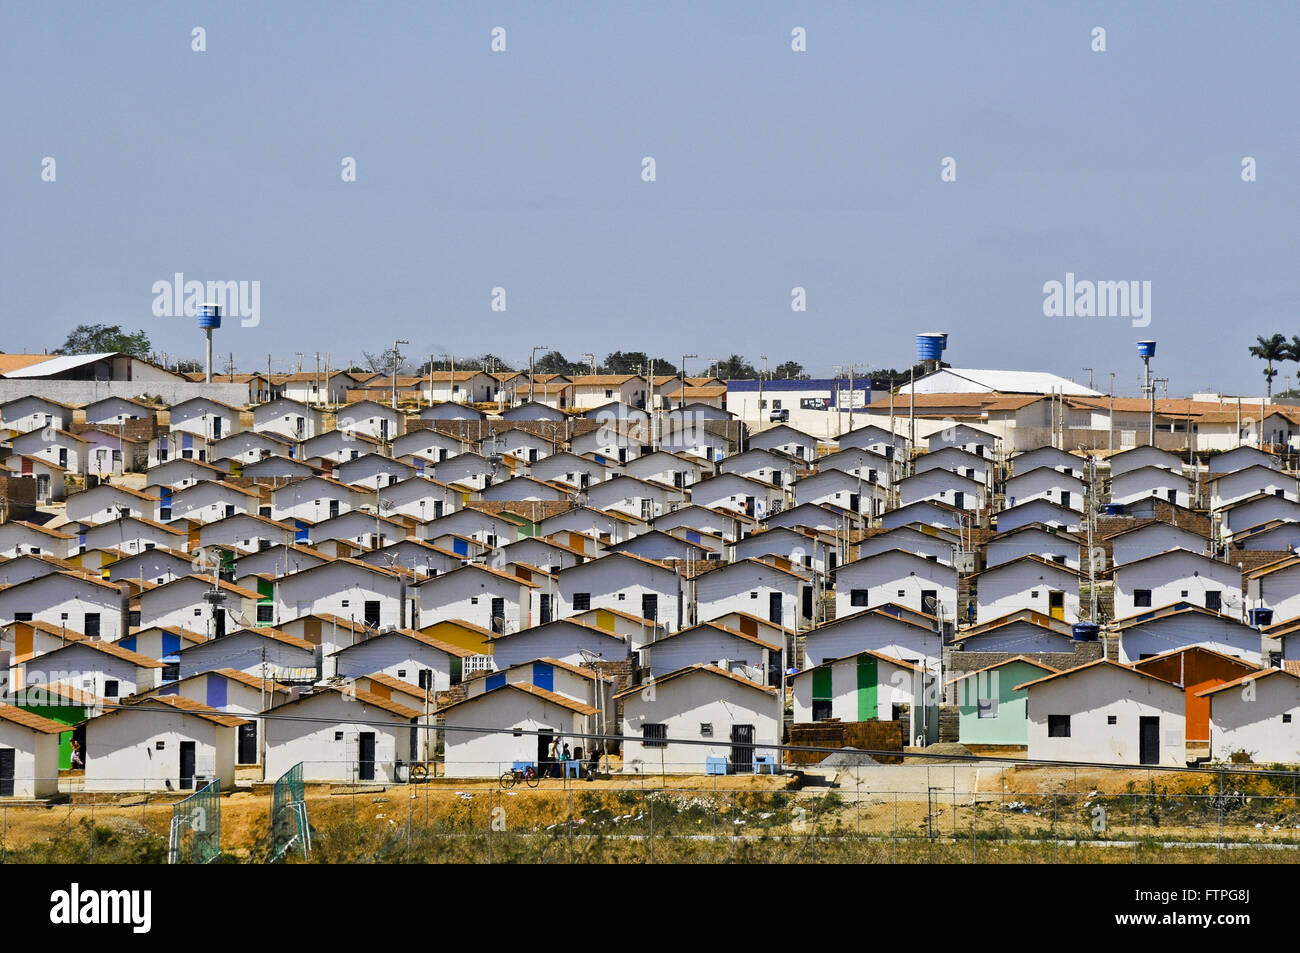 Lake Breeze Residential complex on the outskirts of the city - region of the rough Stock Photo